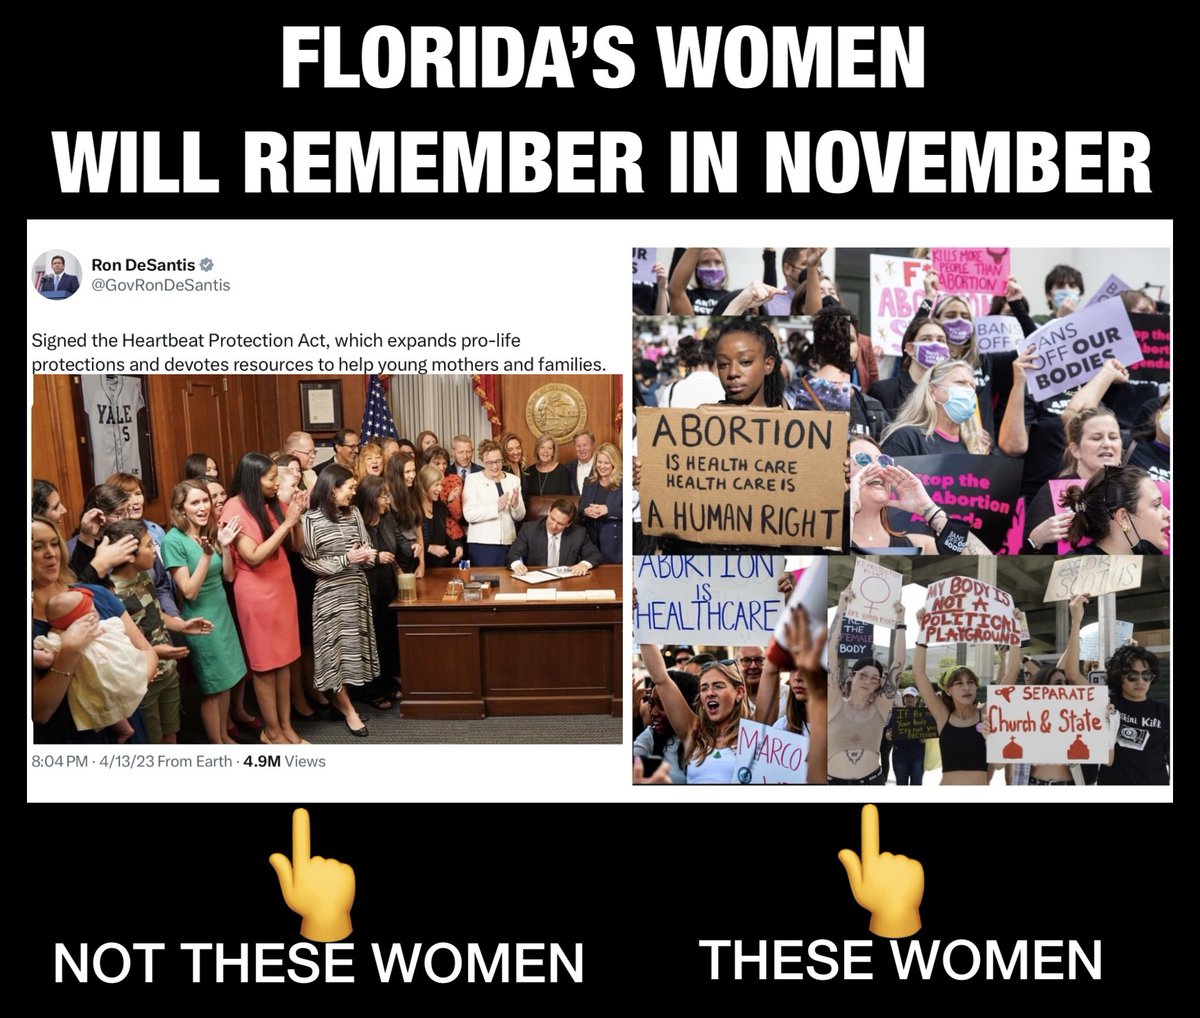 #TrumpsFloridaAbortionBan 🚨 Florida’s 6-week abortion ban just went into effect. REMINDER: Ron DeSantis signed the 6-week abortion ban in the darkness of night because he didn’t want women to notice. We’re headed toward fetal personhood — Republicans under Trump will not